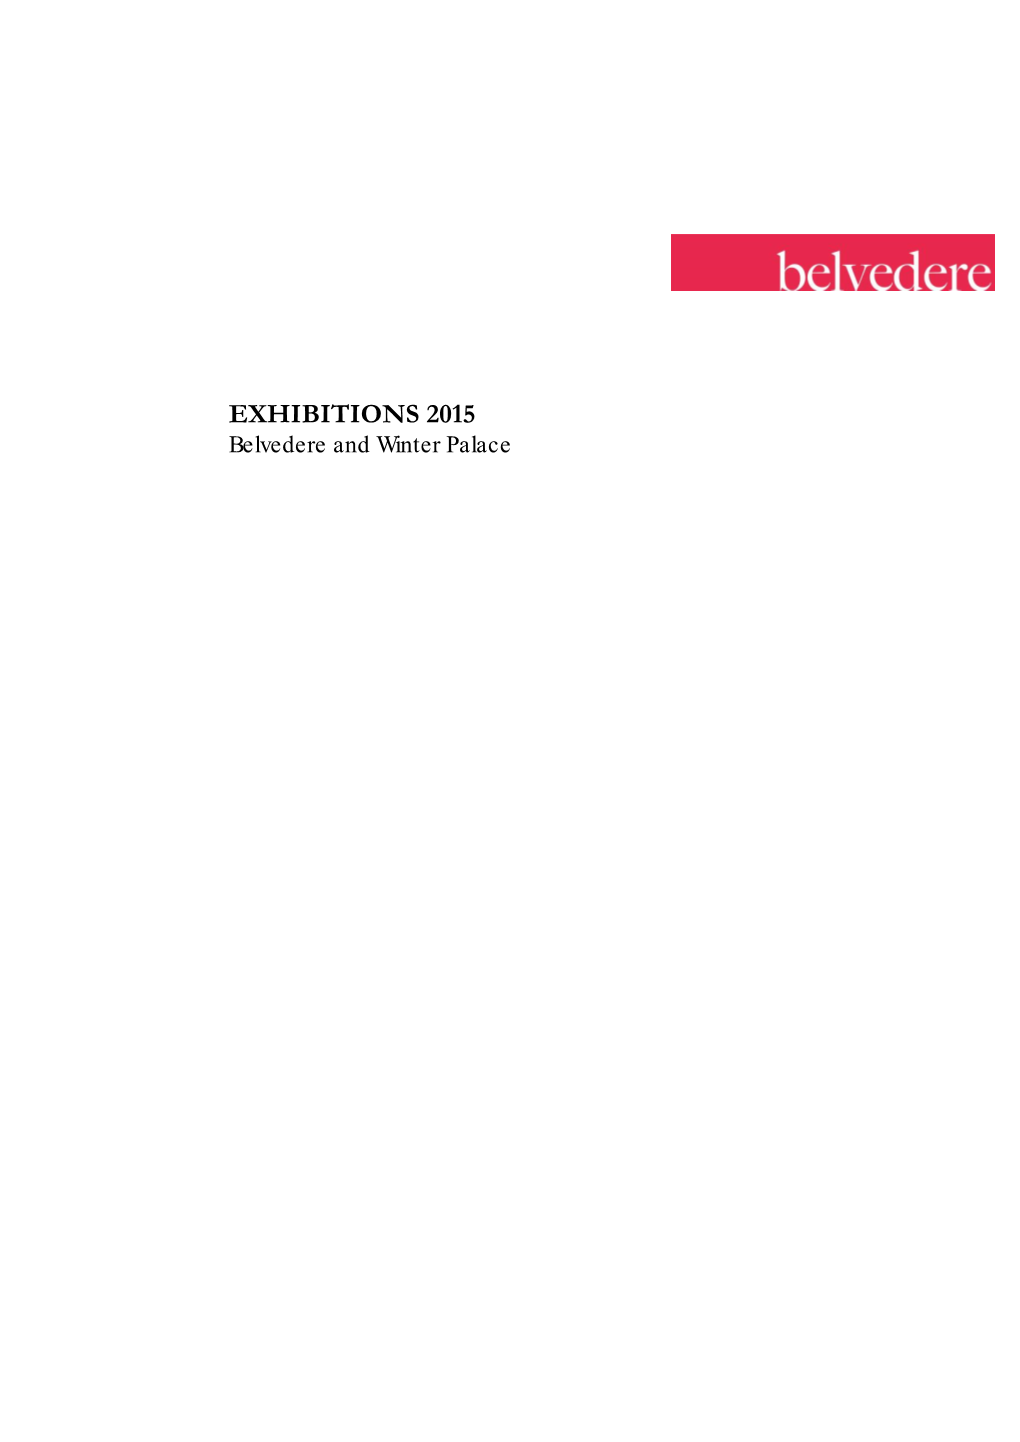 EXHIBITIONS 2015 Belvedere and Winter Palace